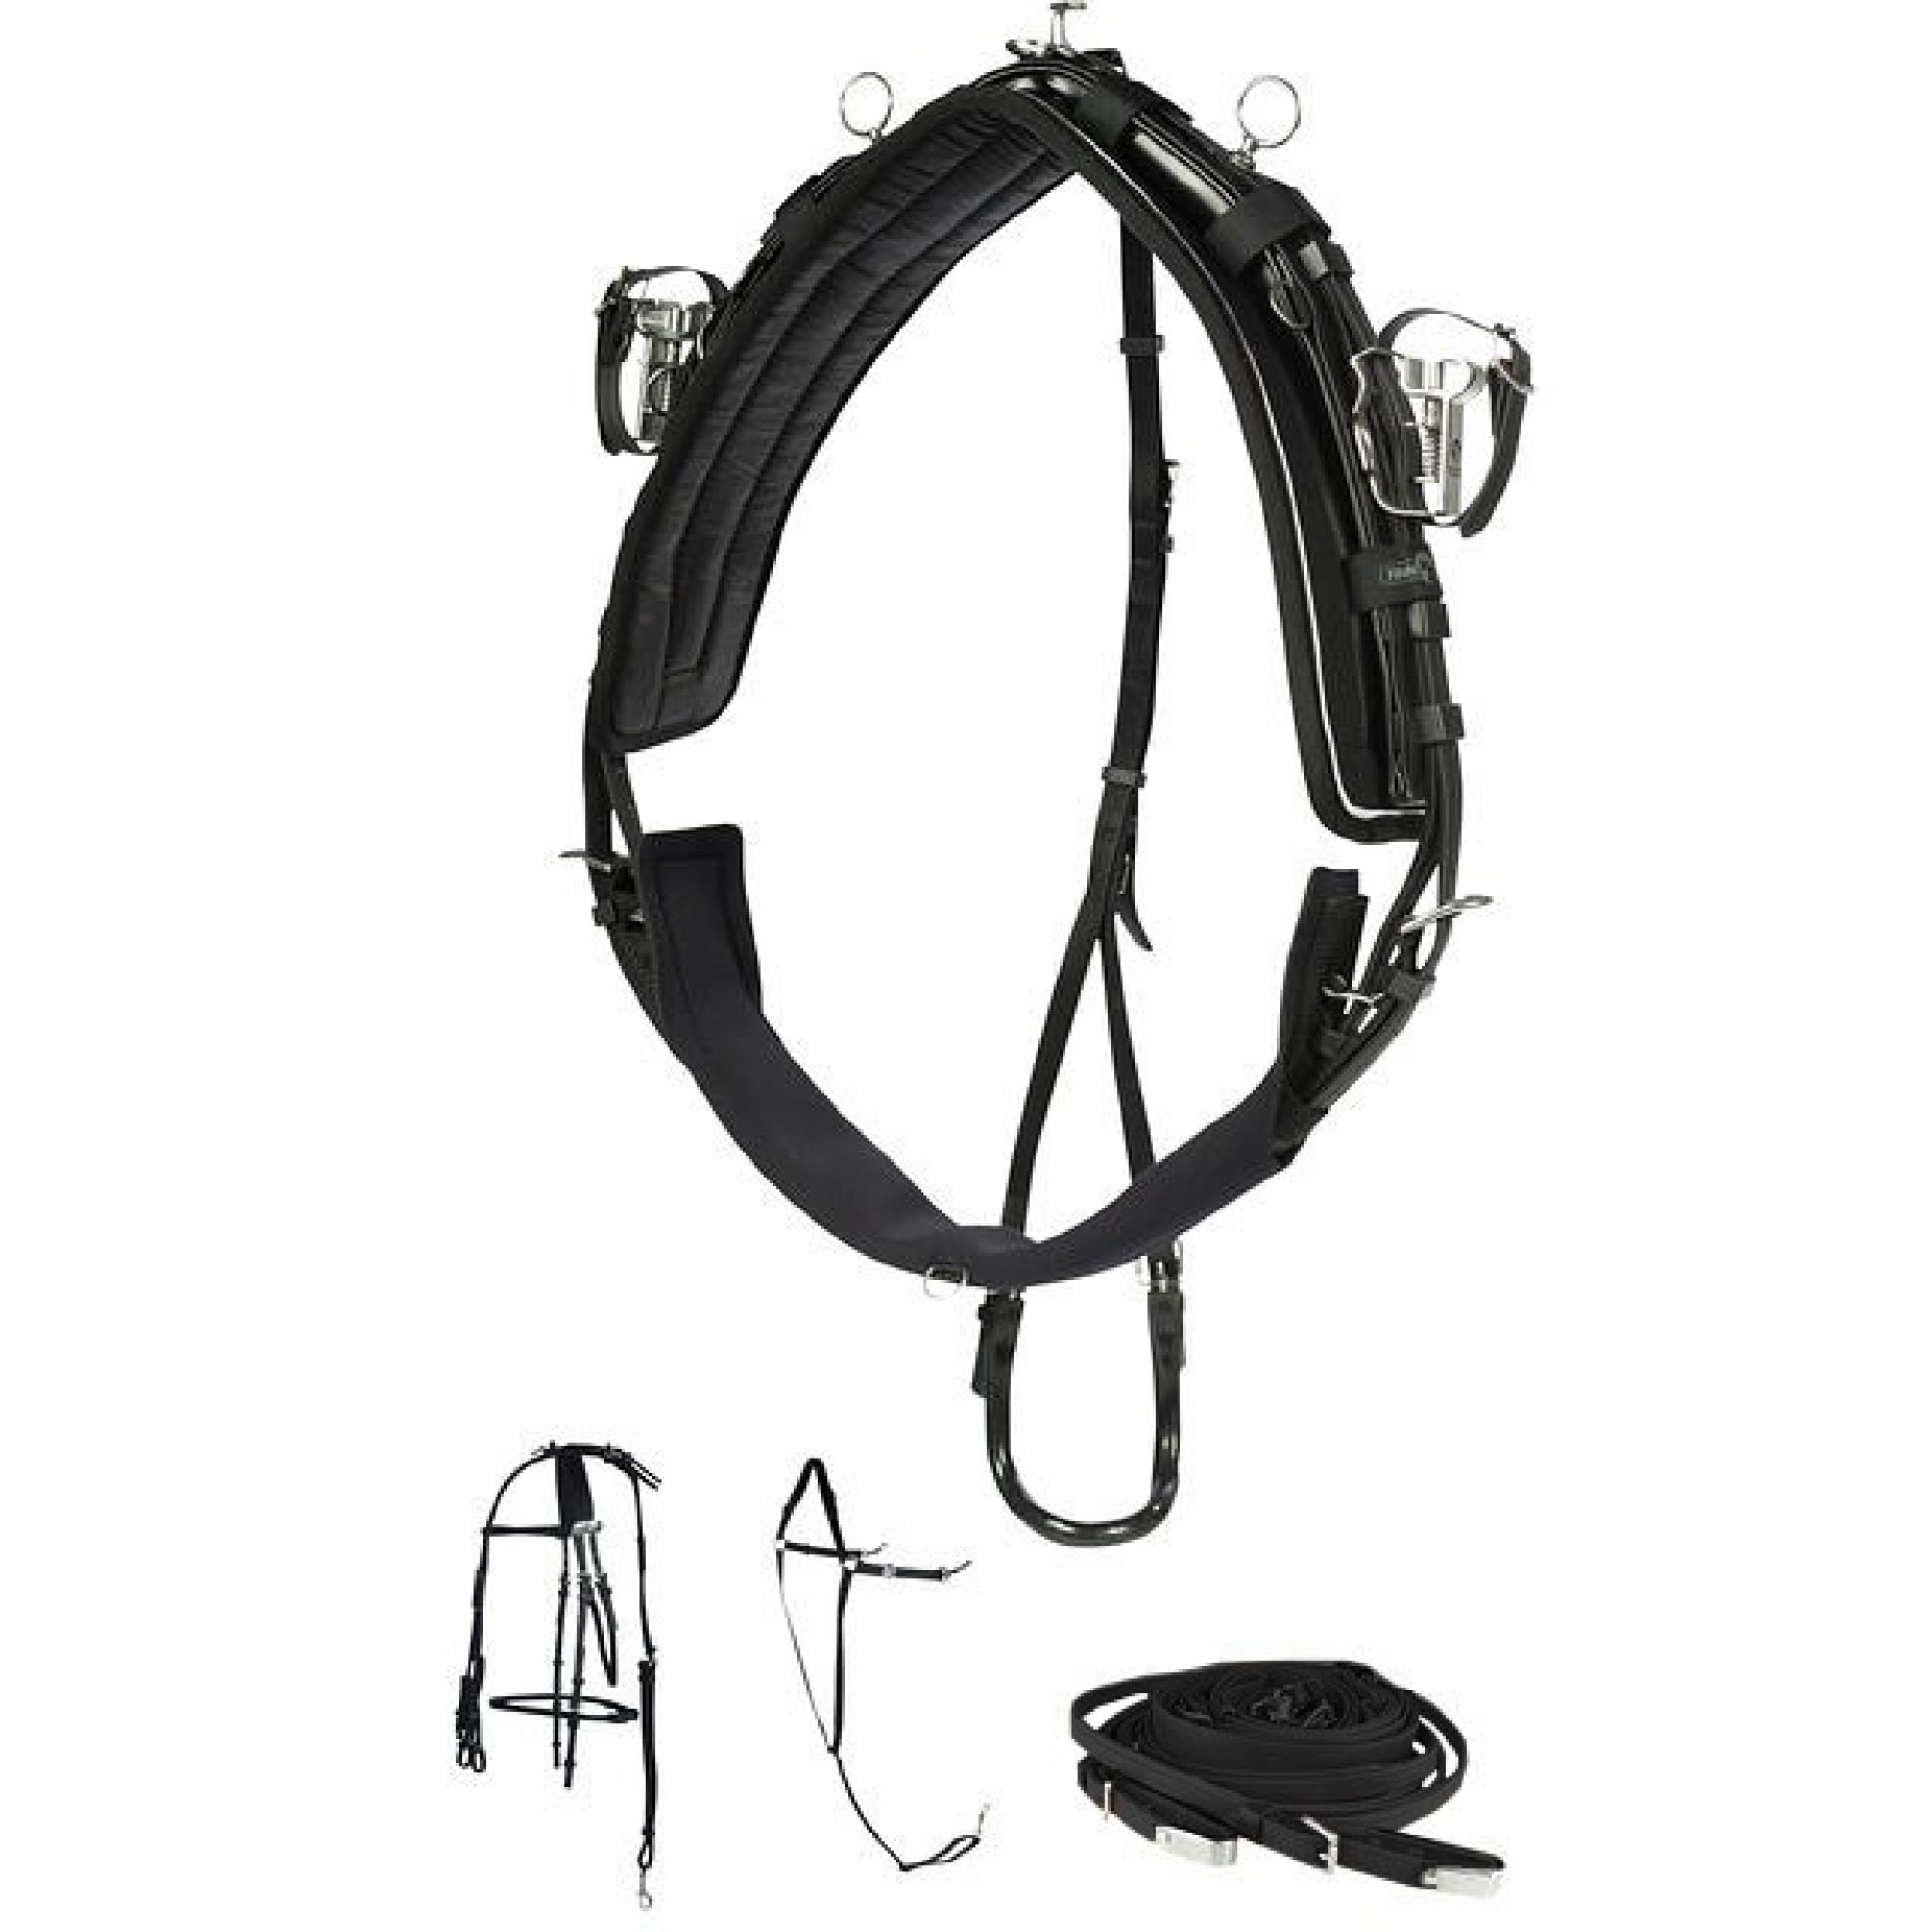 Finntack Pro QH synthetic (100% beta) pony harness, complete